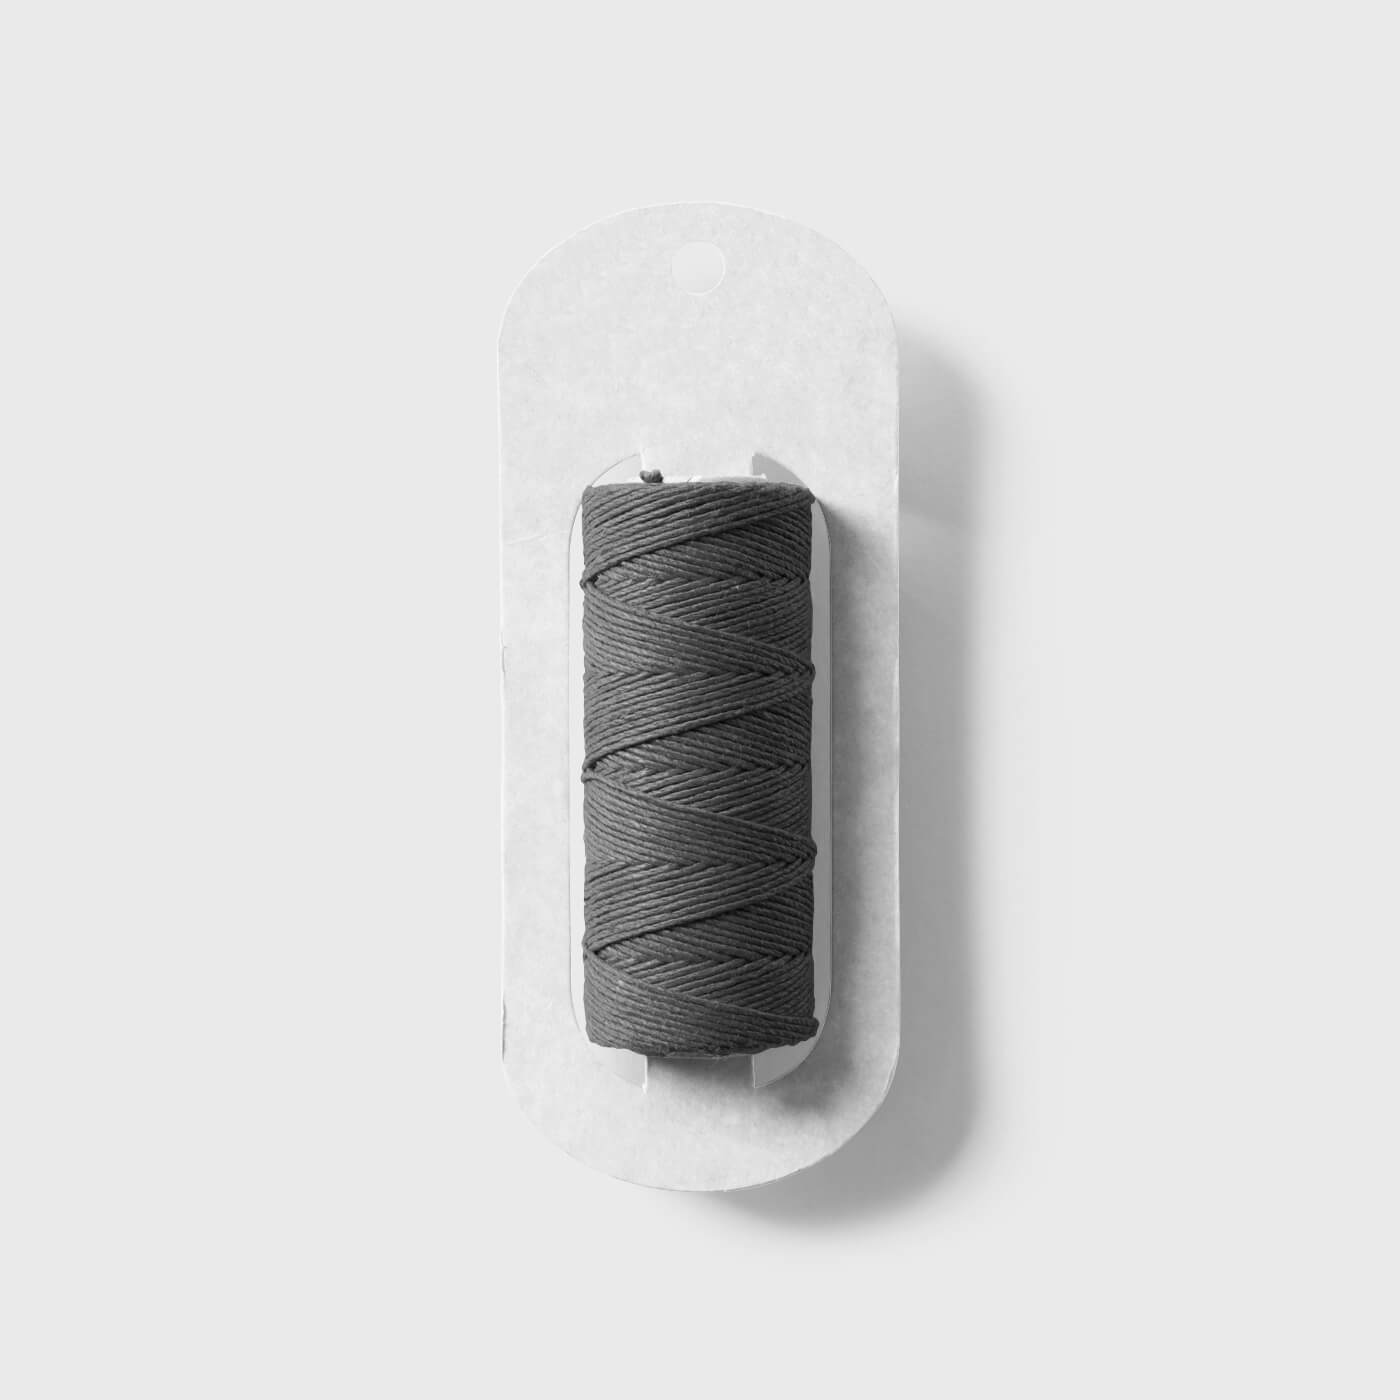 Free Sewing Thread Spool With Label Mockup PSD2